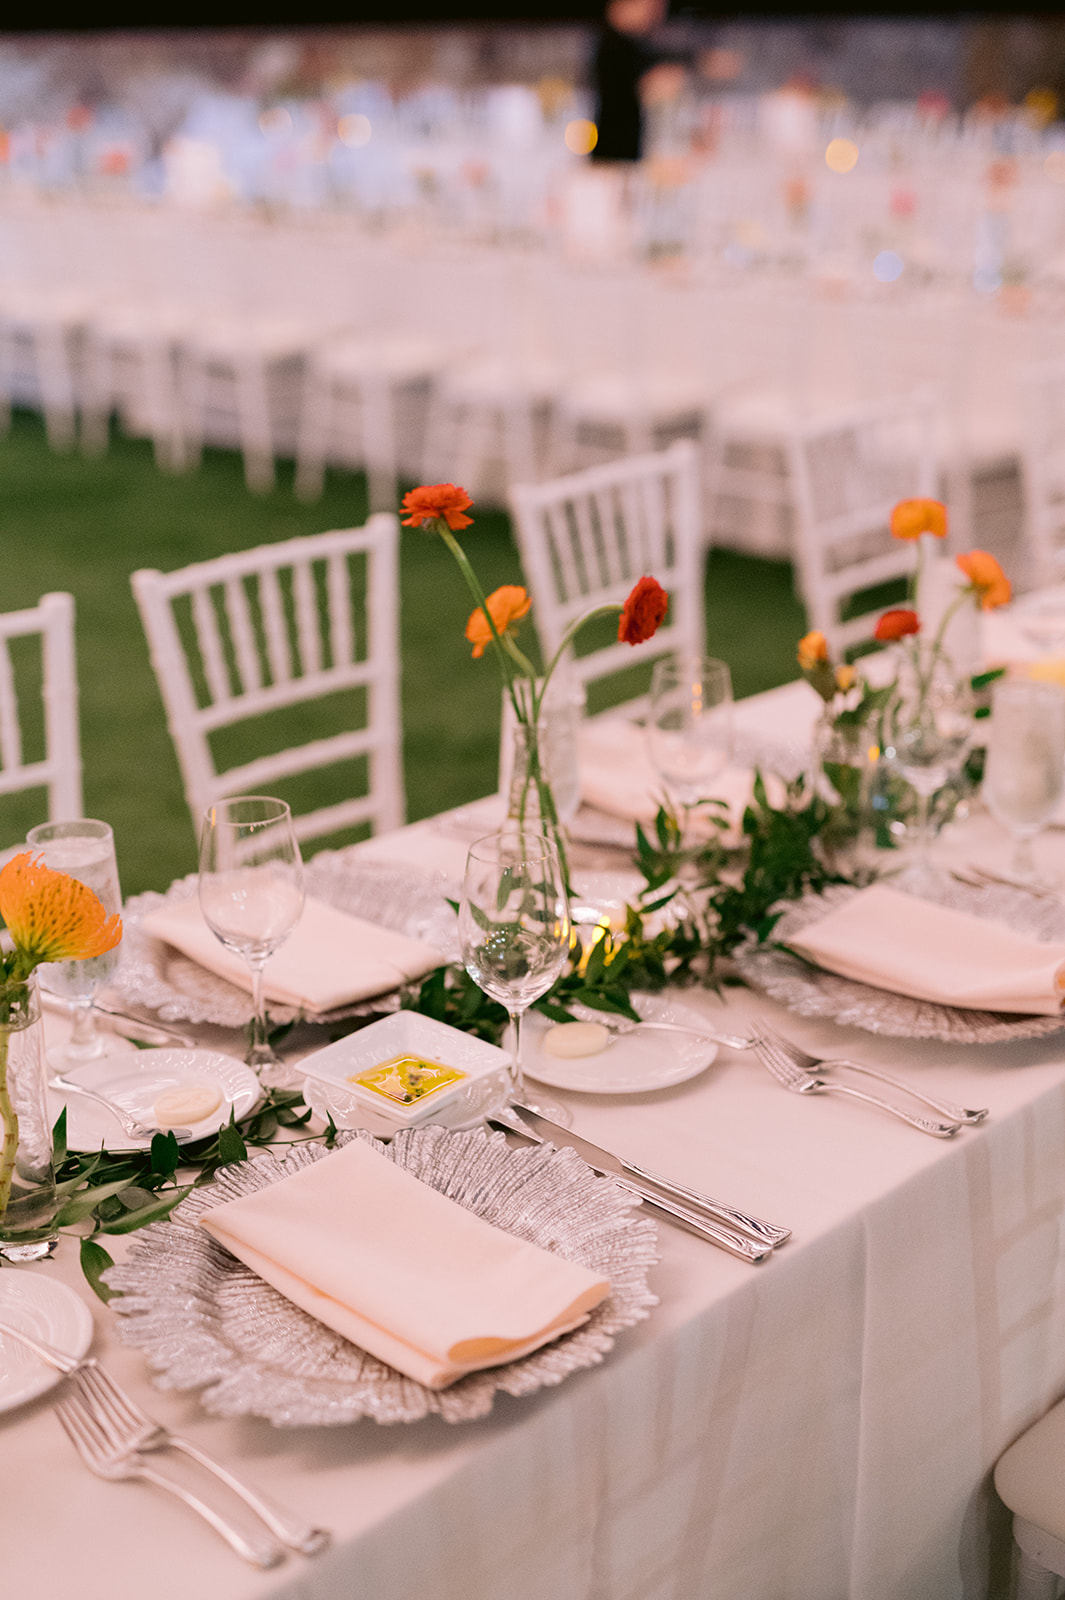 Romantic outdoor wedding reception table decor with simple poppy floral centerpieces.